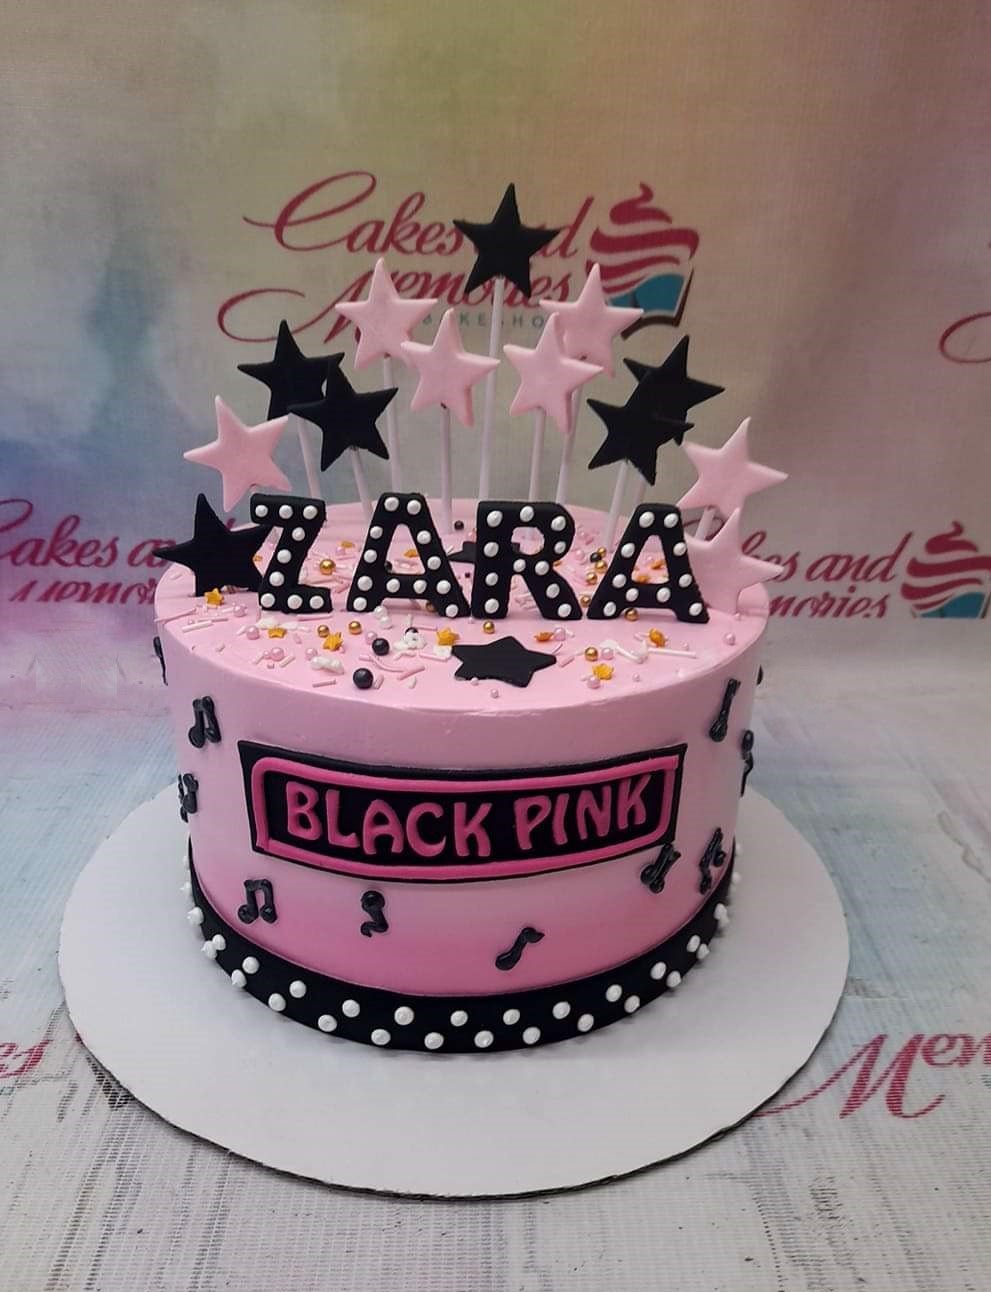 Blackpink Theme Cake | Bakers Oven - Order Online Now